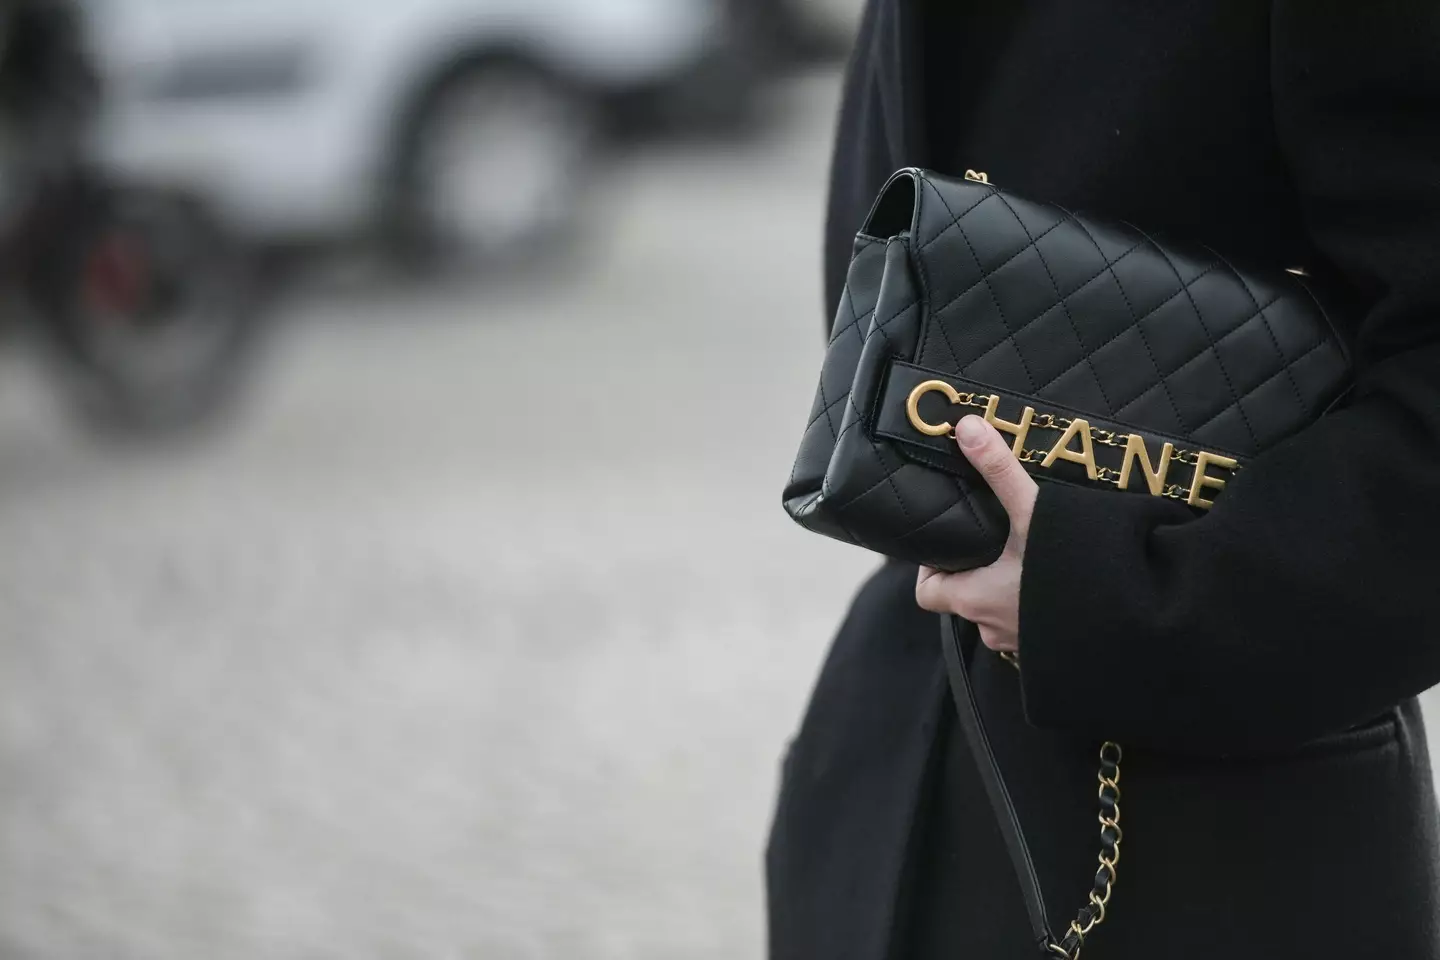 Samantha said once of her most expensive purchases was a Chanel handbag.